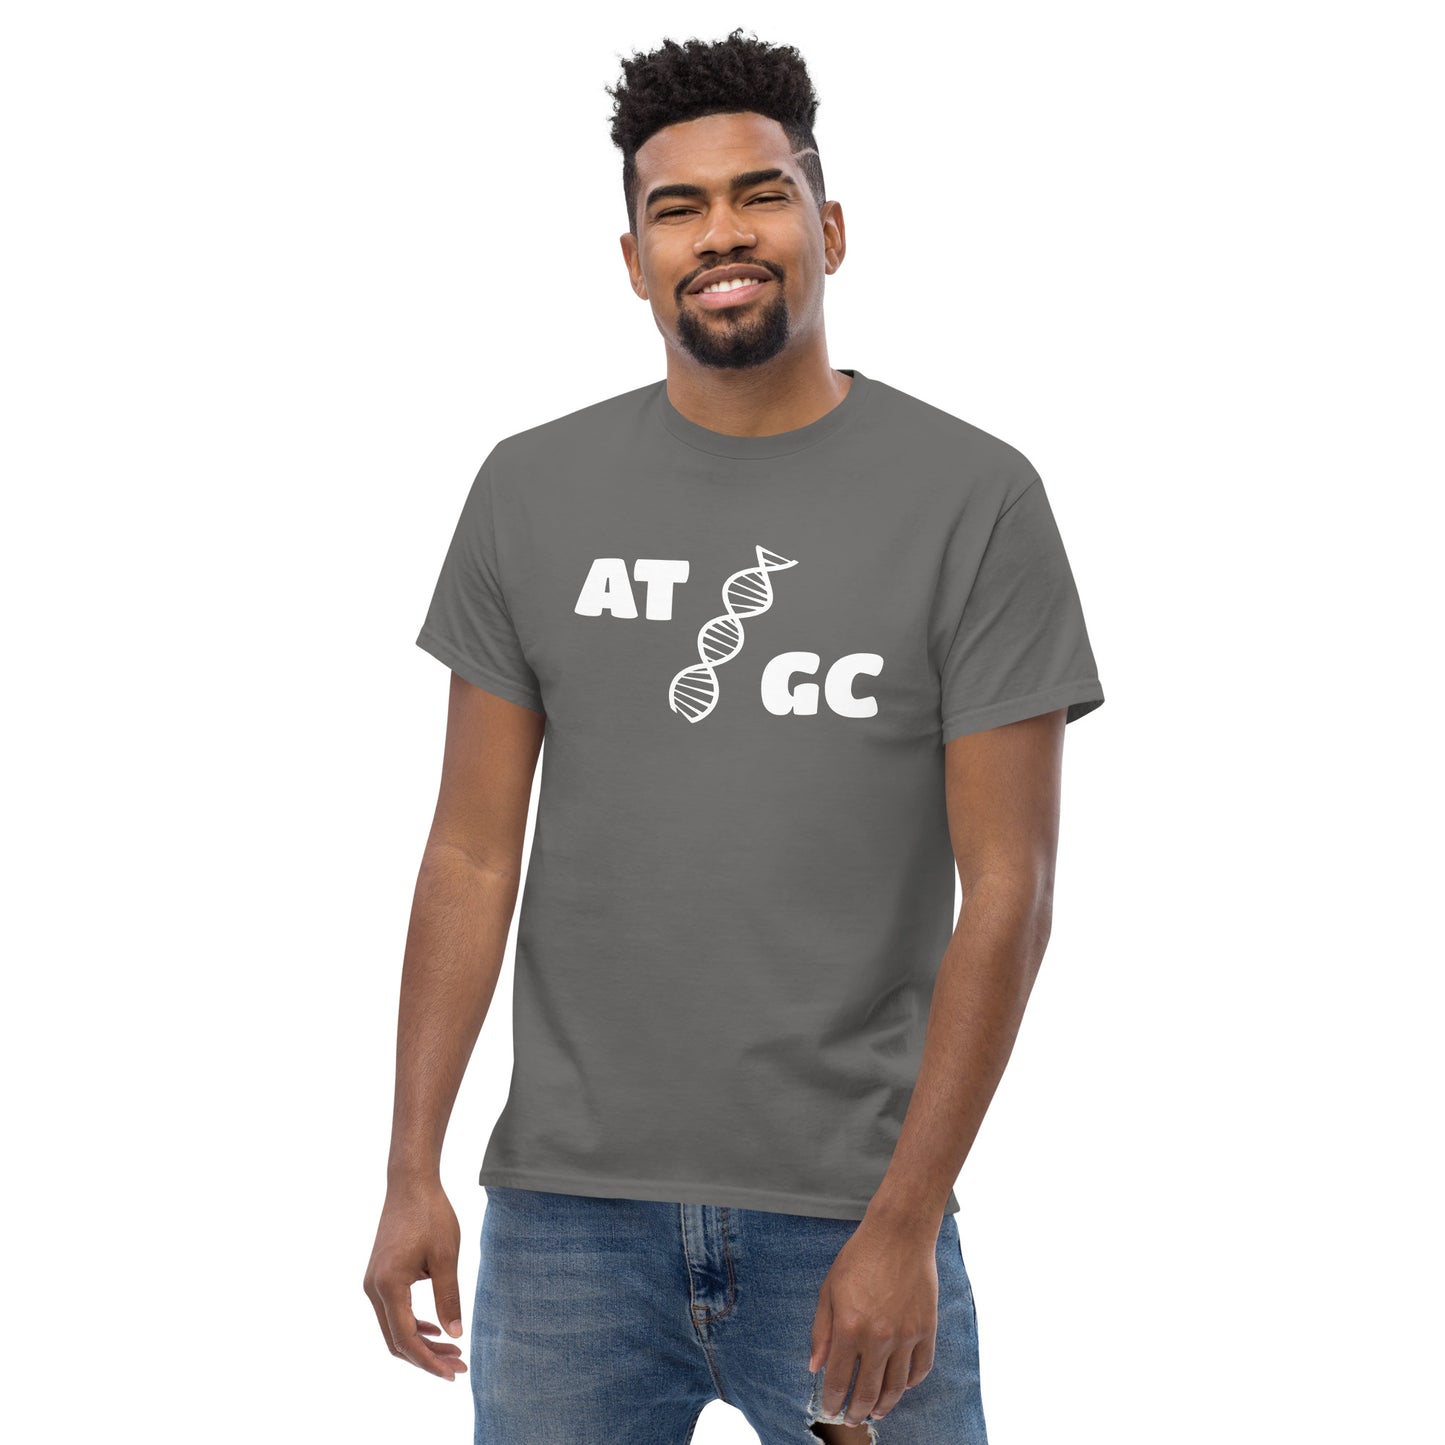 Men with charcoal t-shirt with image of a DNA string and the text "ATGC"